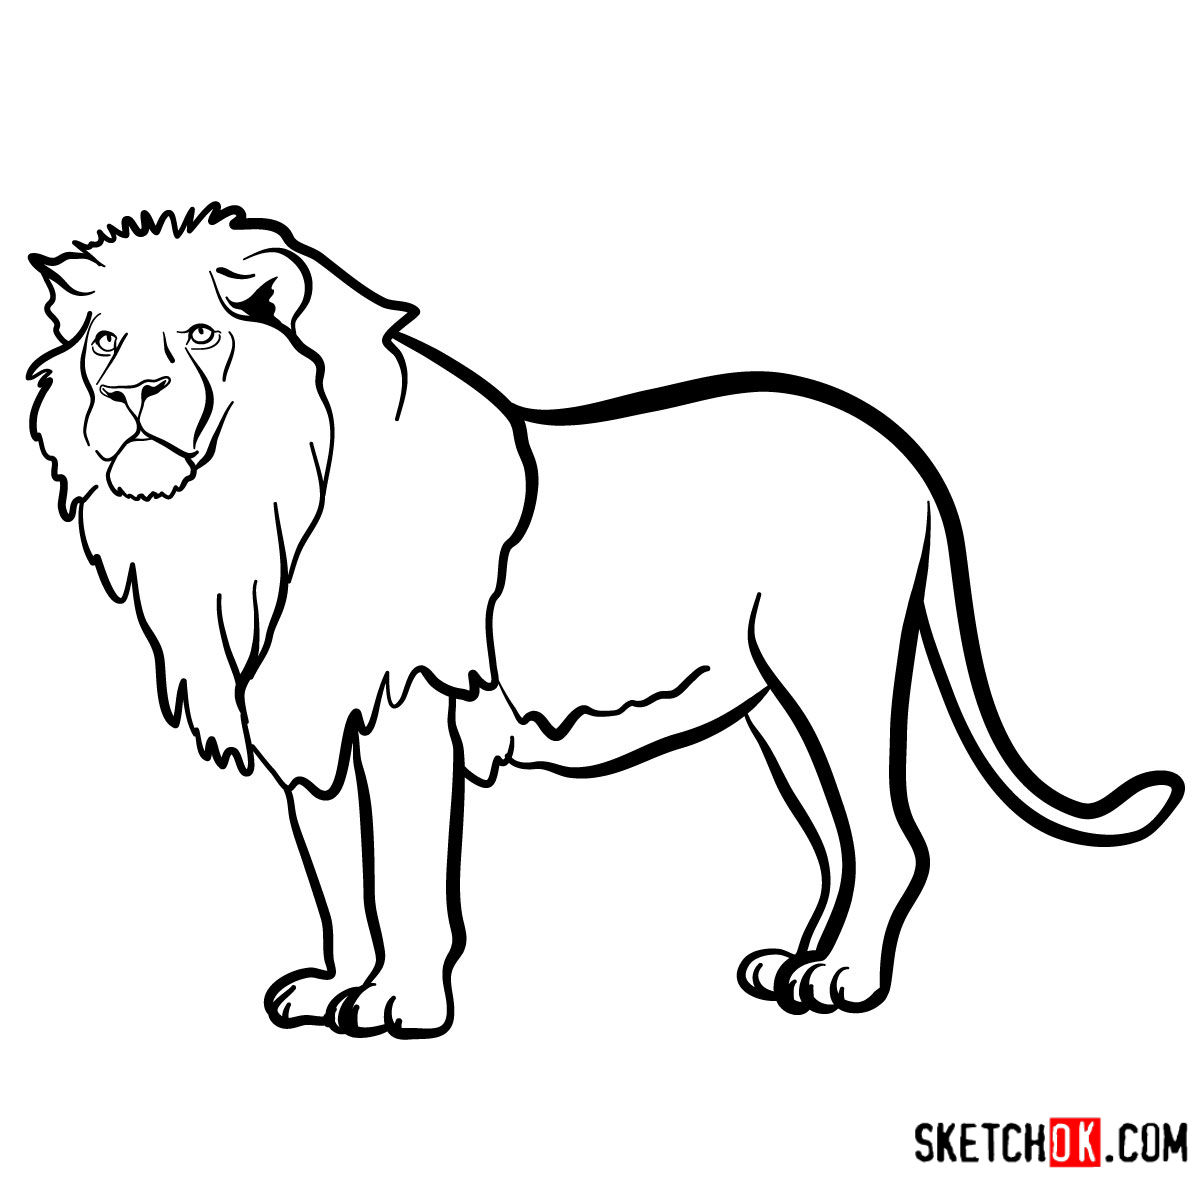 How to draw a Lion standing